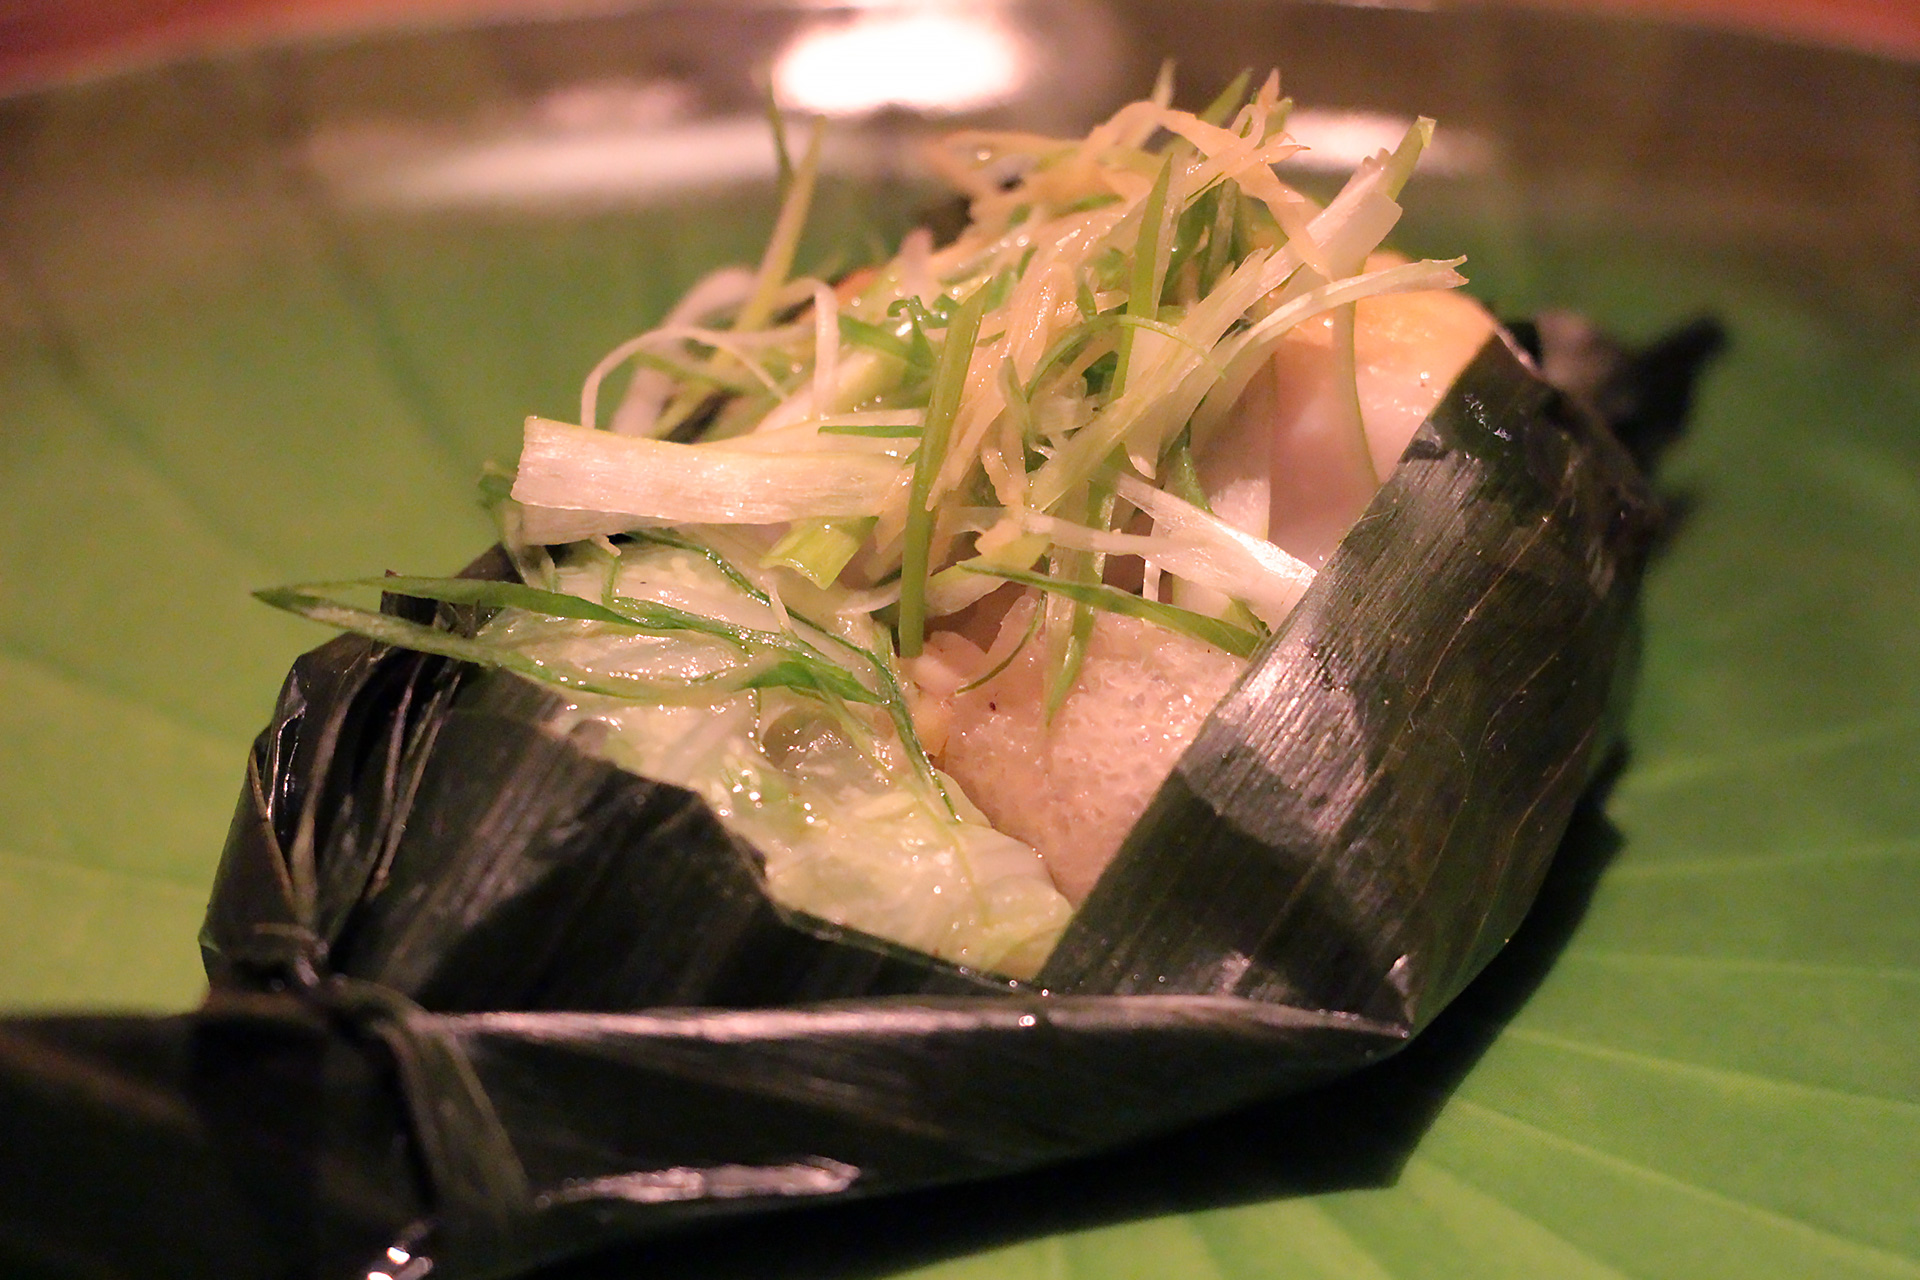 Black Cod Wrapped in Banana Leaf - Picked White Melon, Bamboo 'Cannelloni'